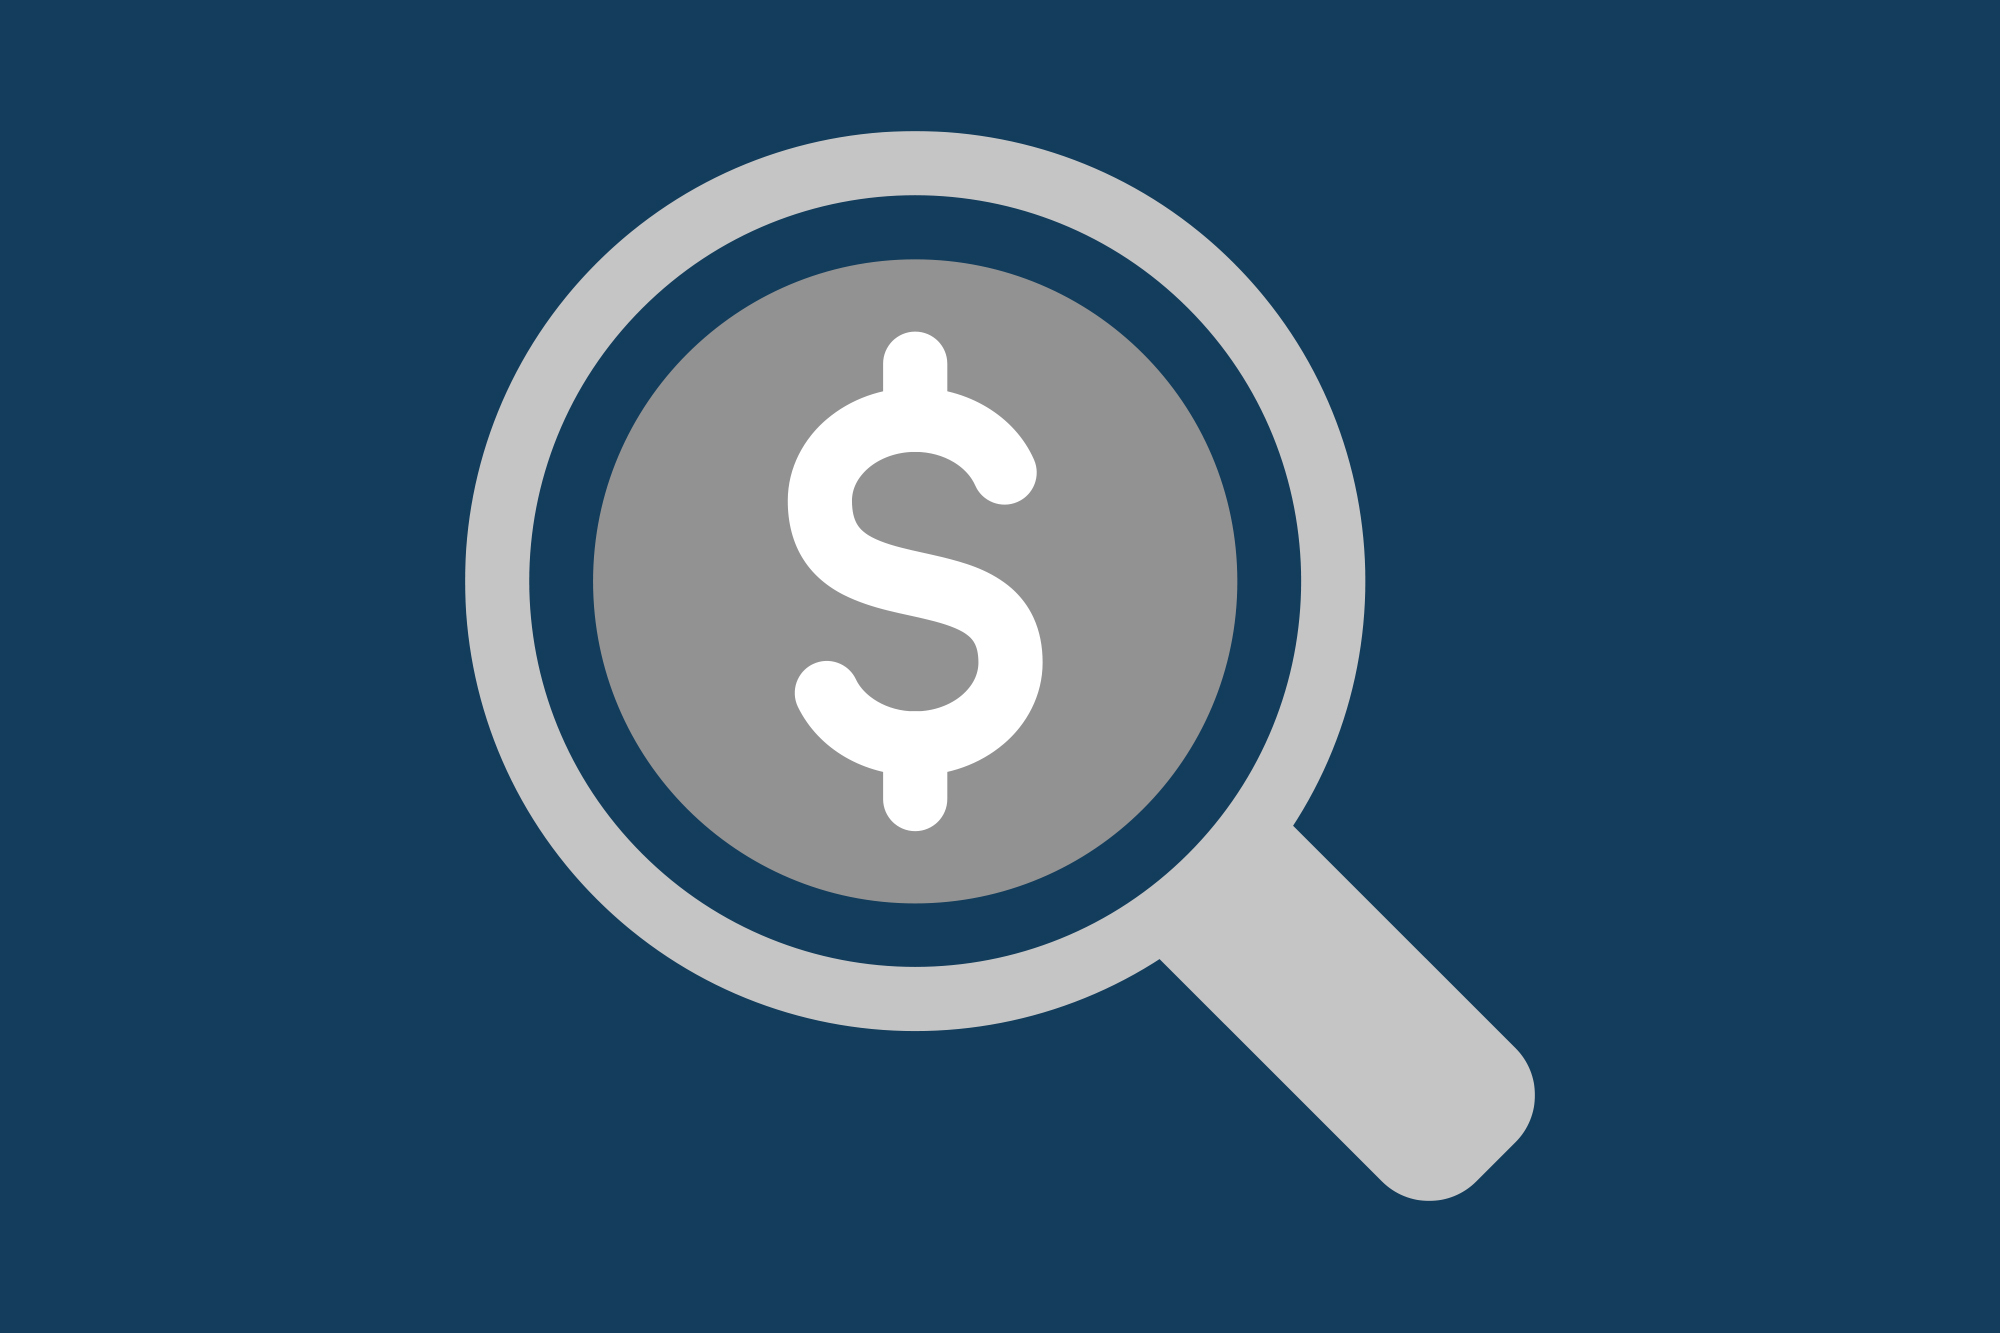 Magnifying glass icon with money symbol